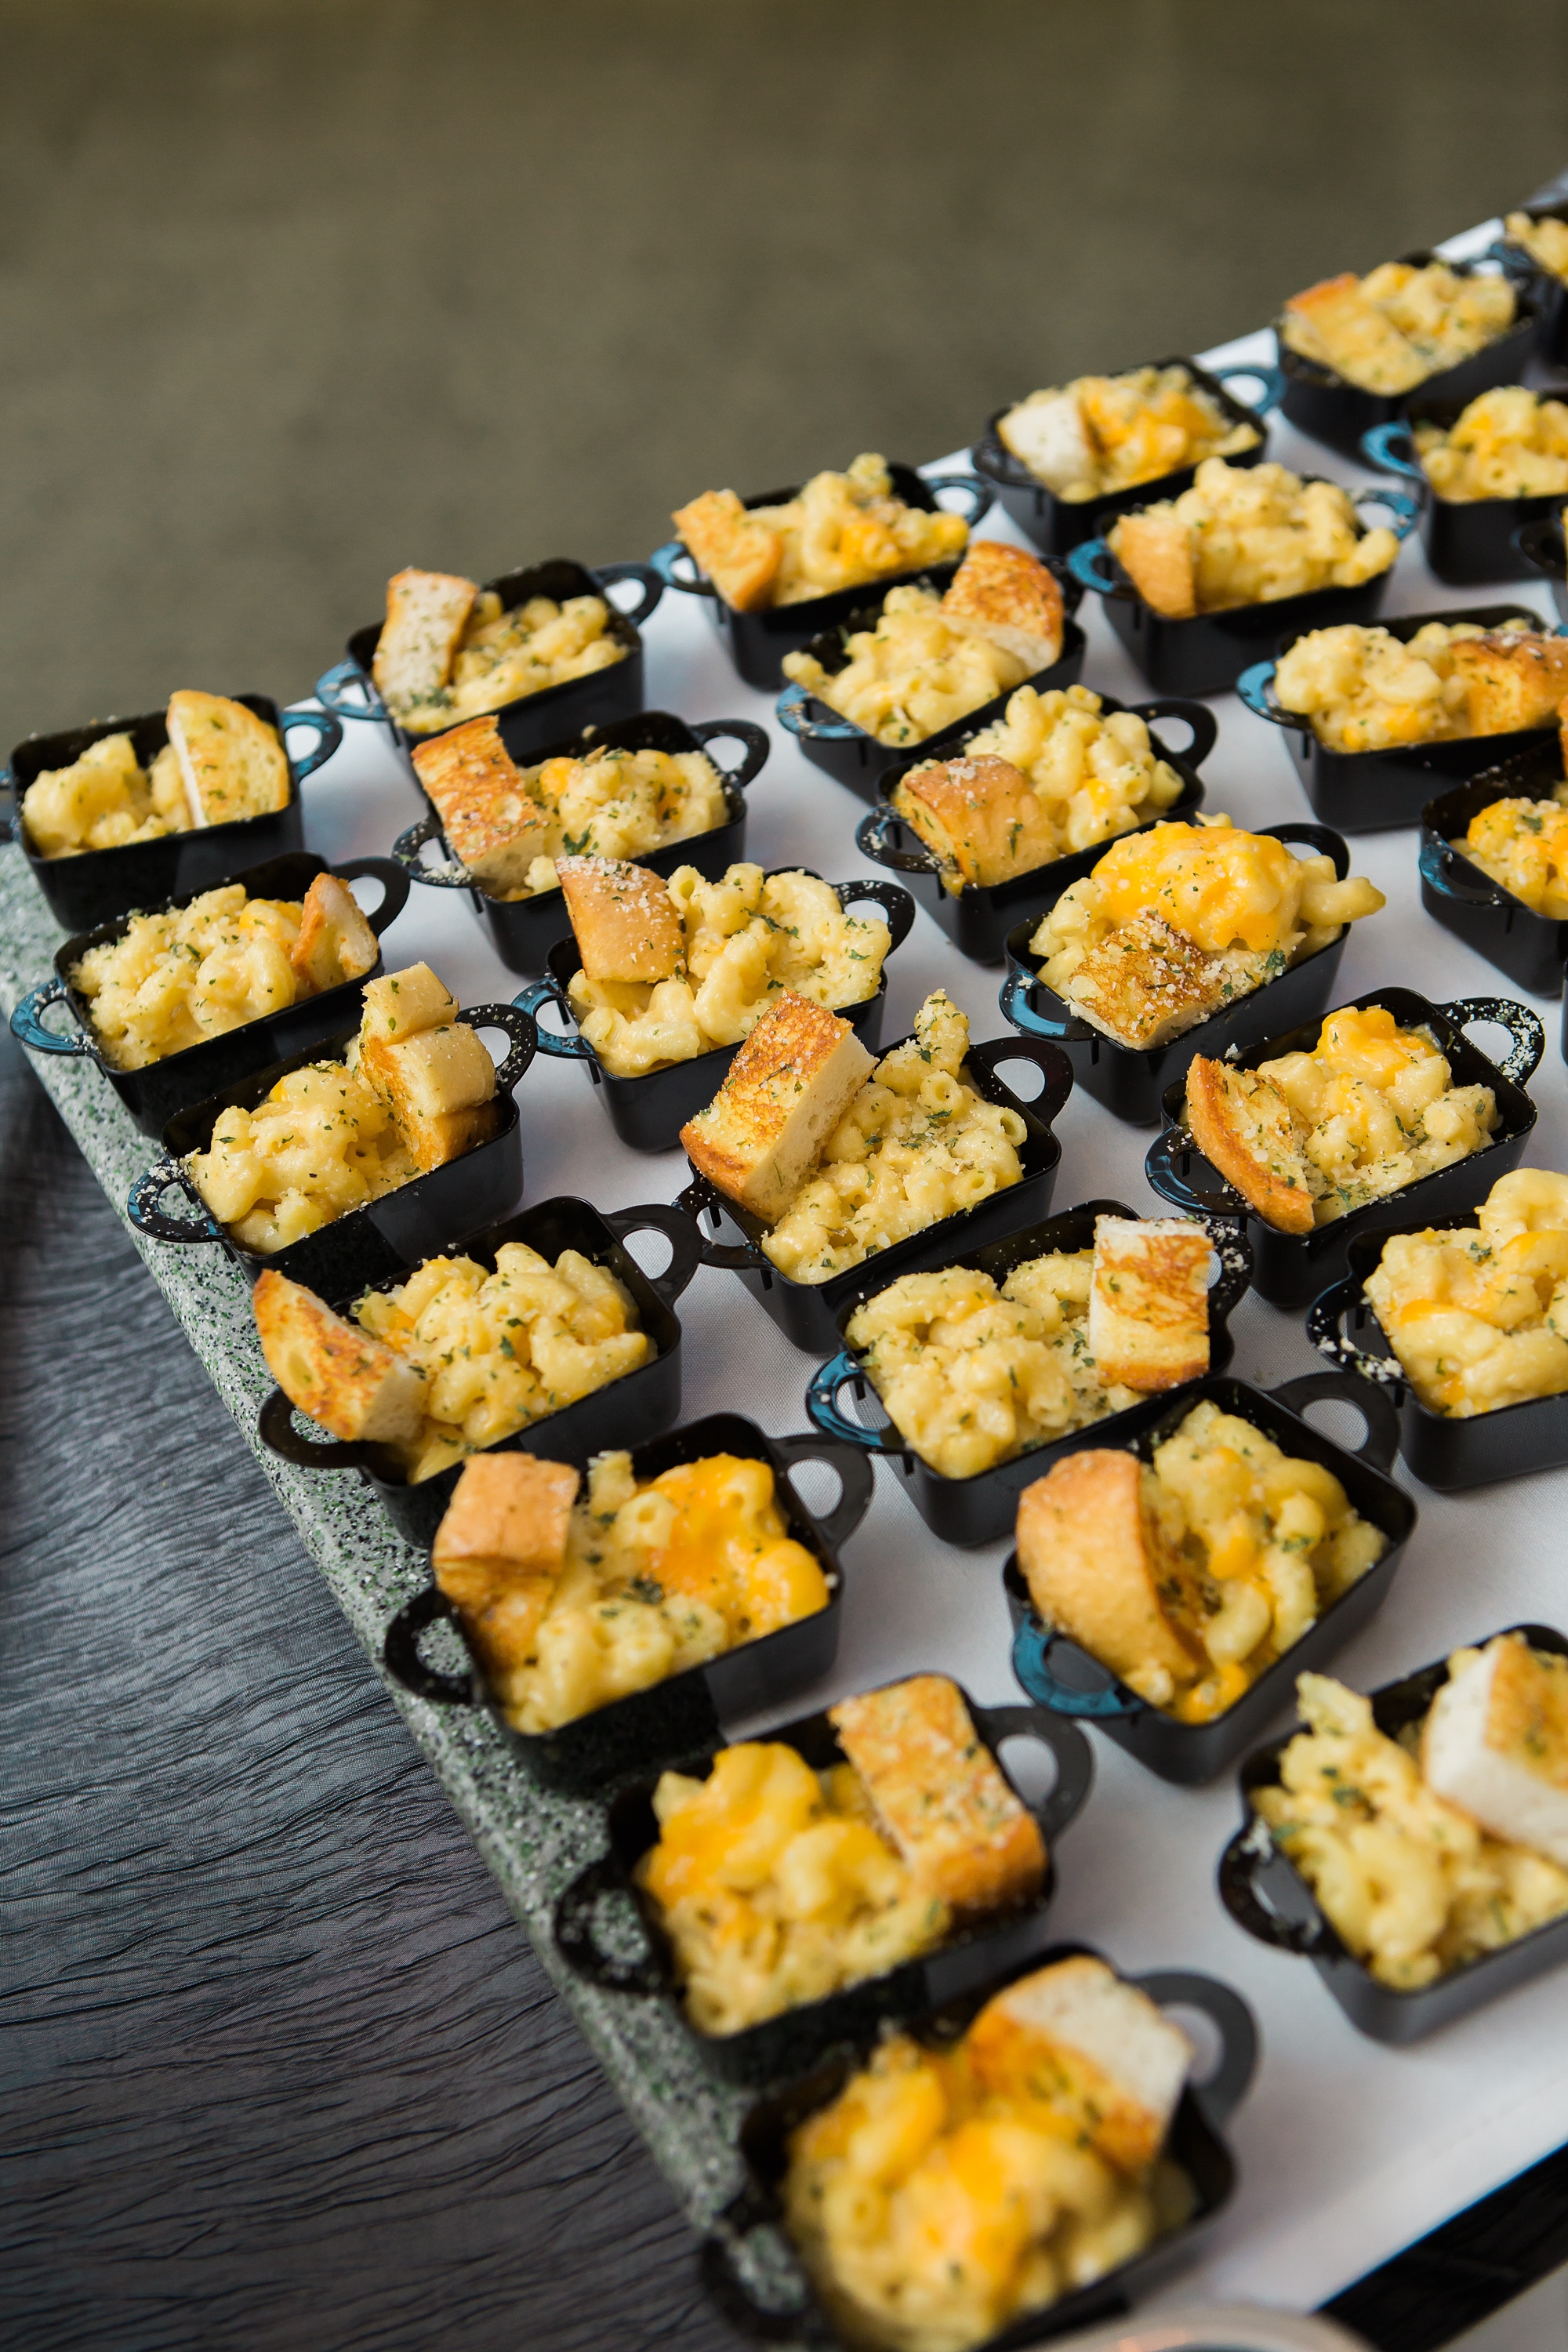 Mac and Cheese station at the reception. East Lake Golf Club by Top Atlanta Wedding Photographer Leigh Wolfe Photography